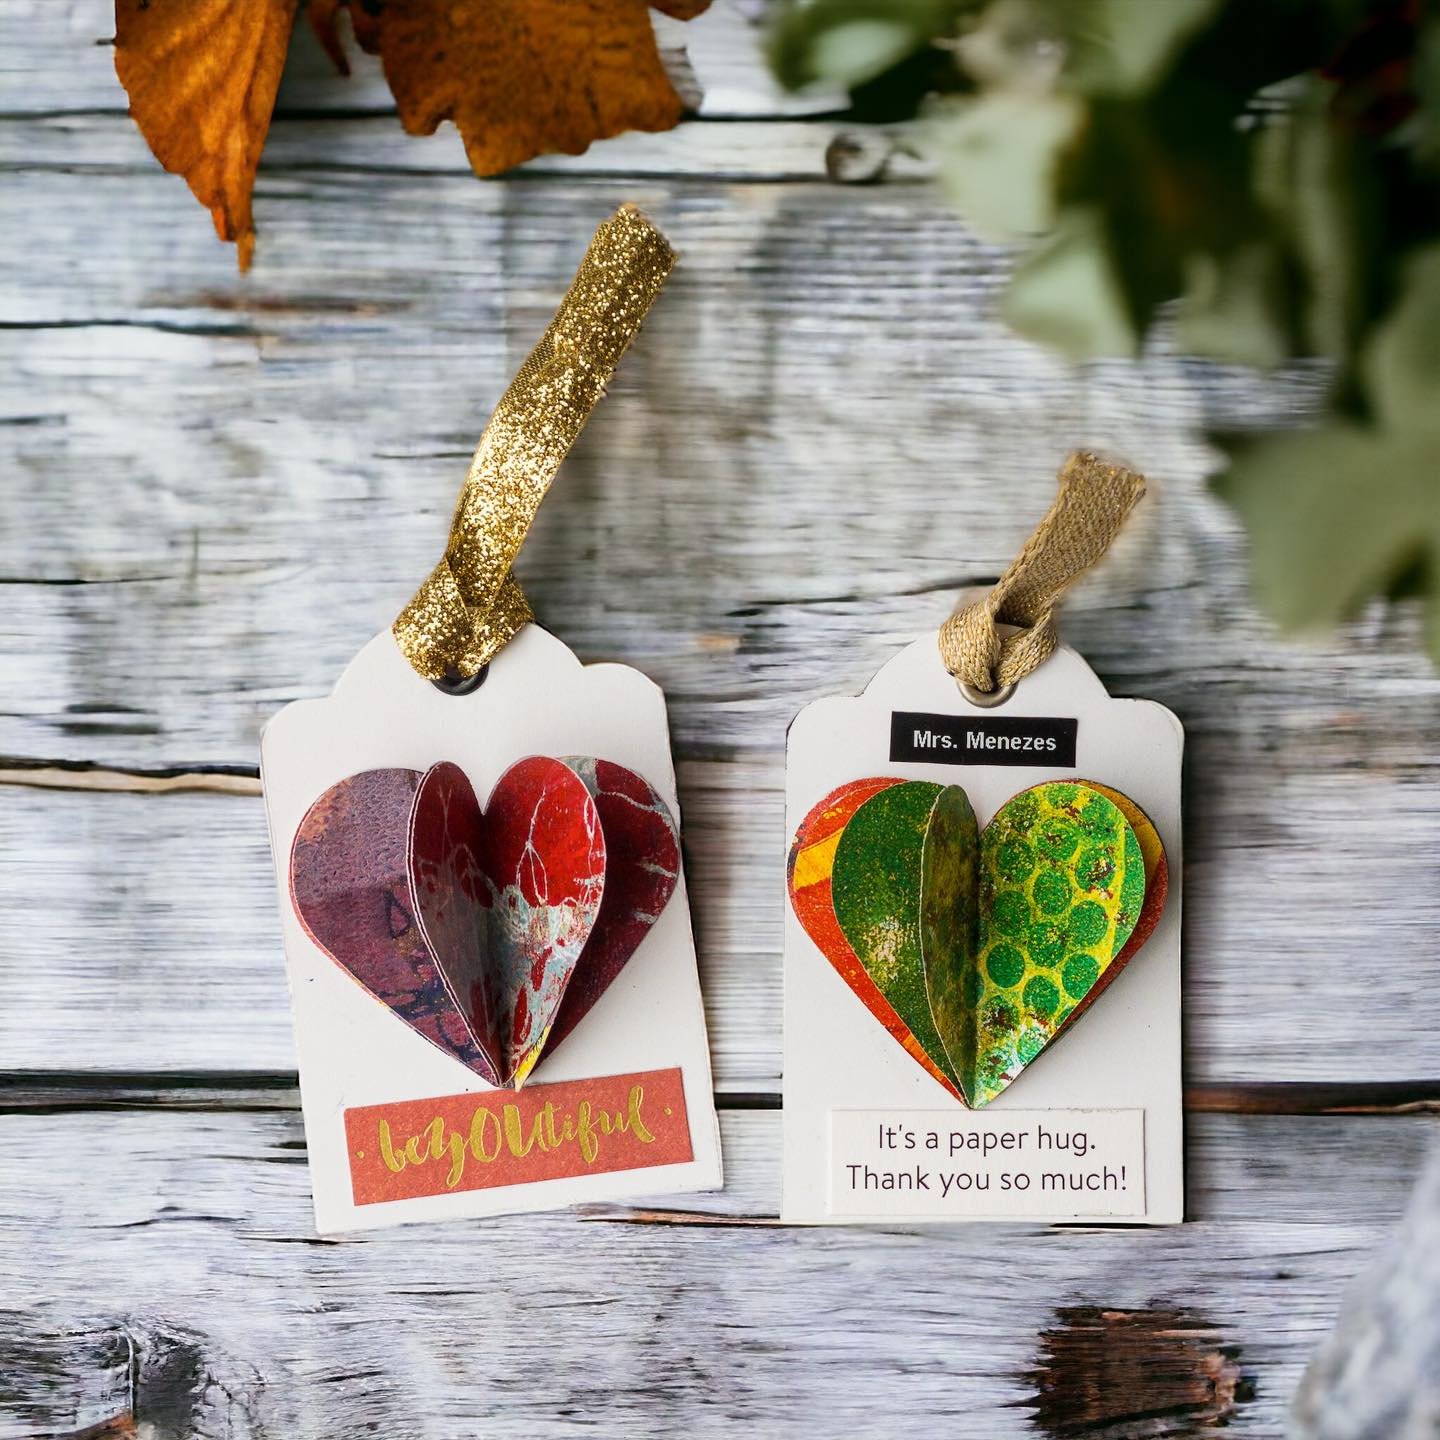 Even if you don't consider yourself a bonafide painter or artist, I know that you can make #mybucketfillers look amazing with simple techniques like these. All you need is some colored paper (I used gel plate prints here), a blank tag and a heart pun